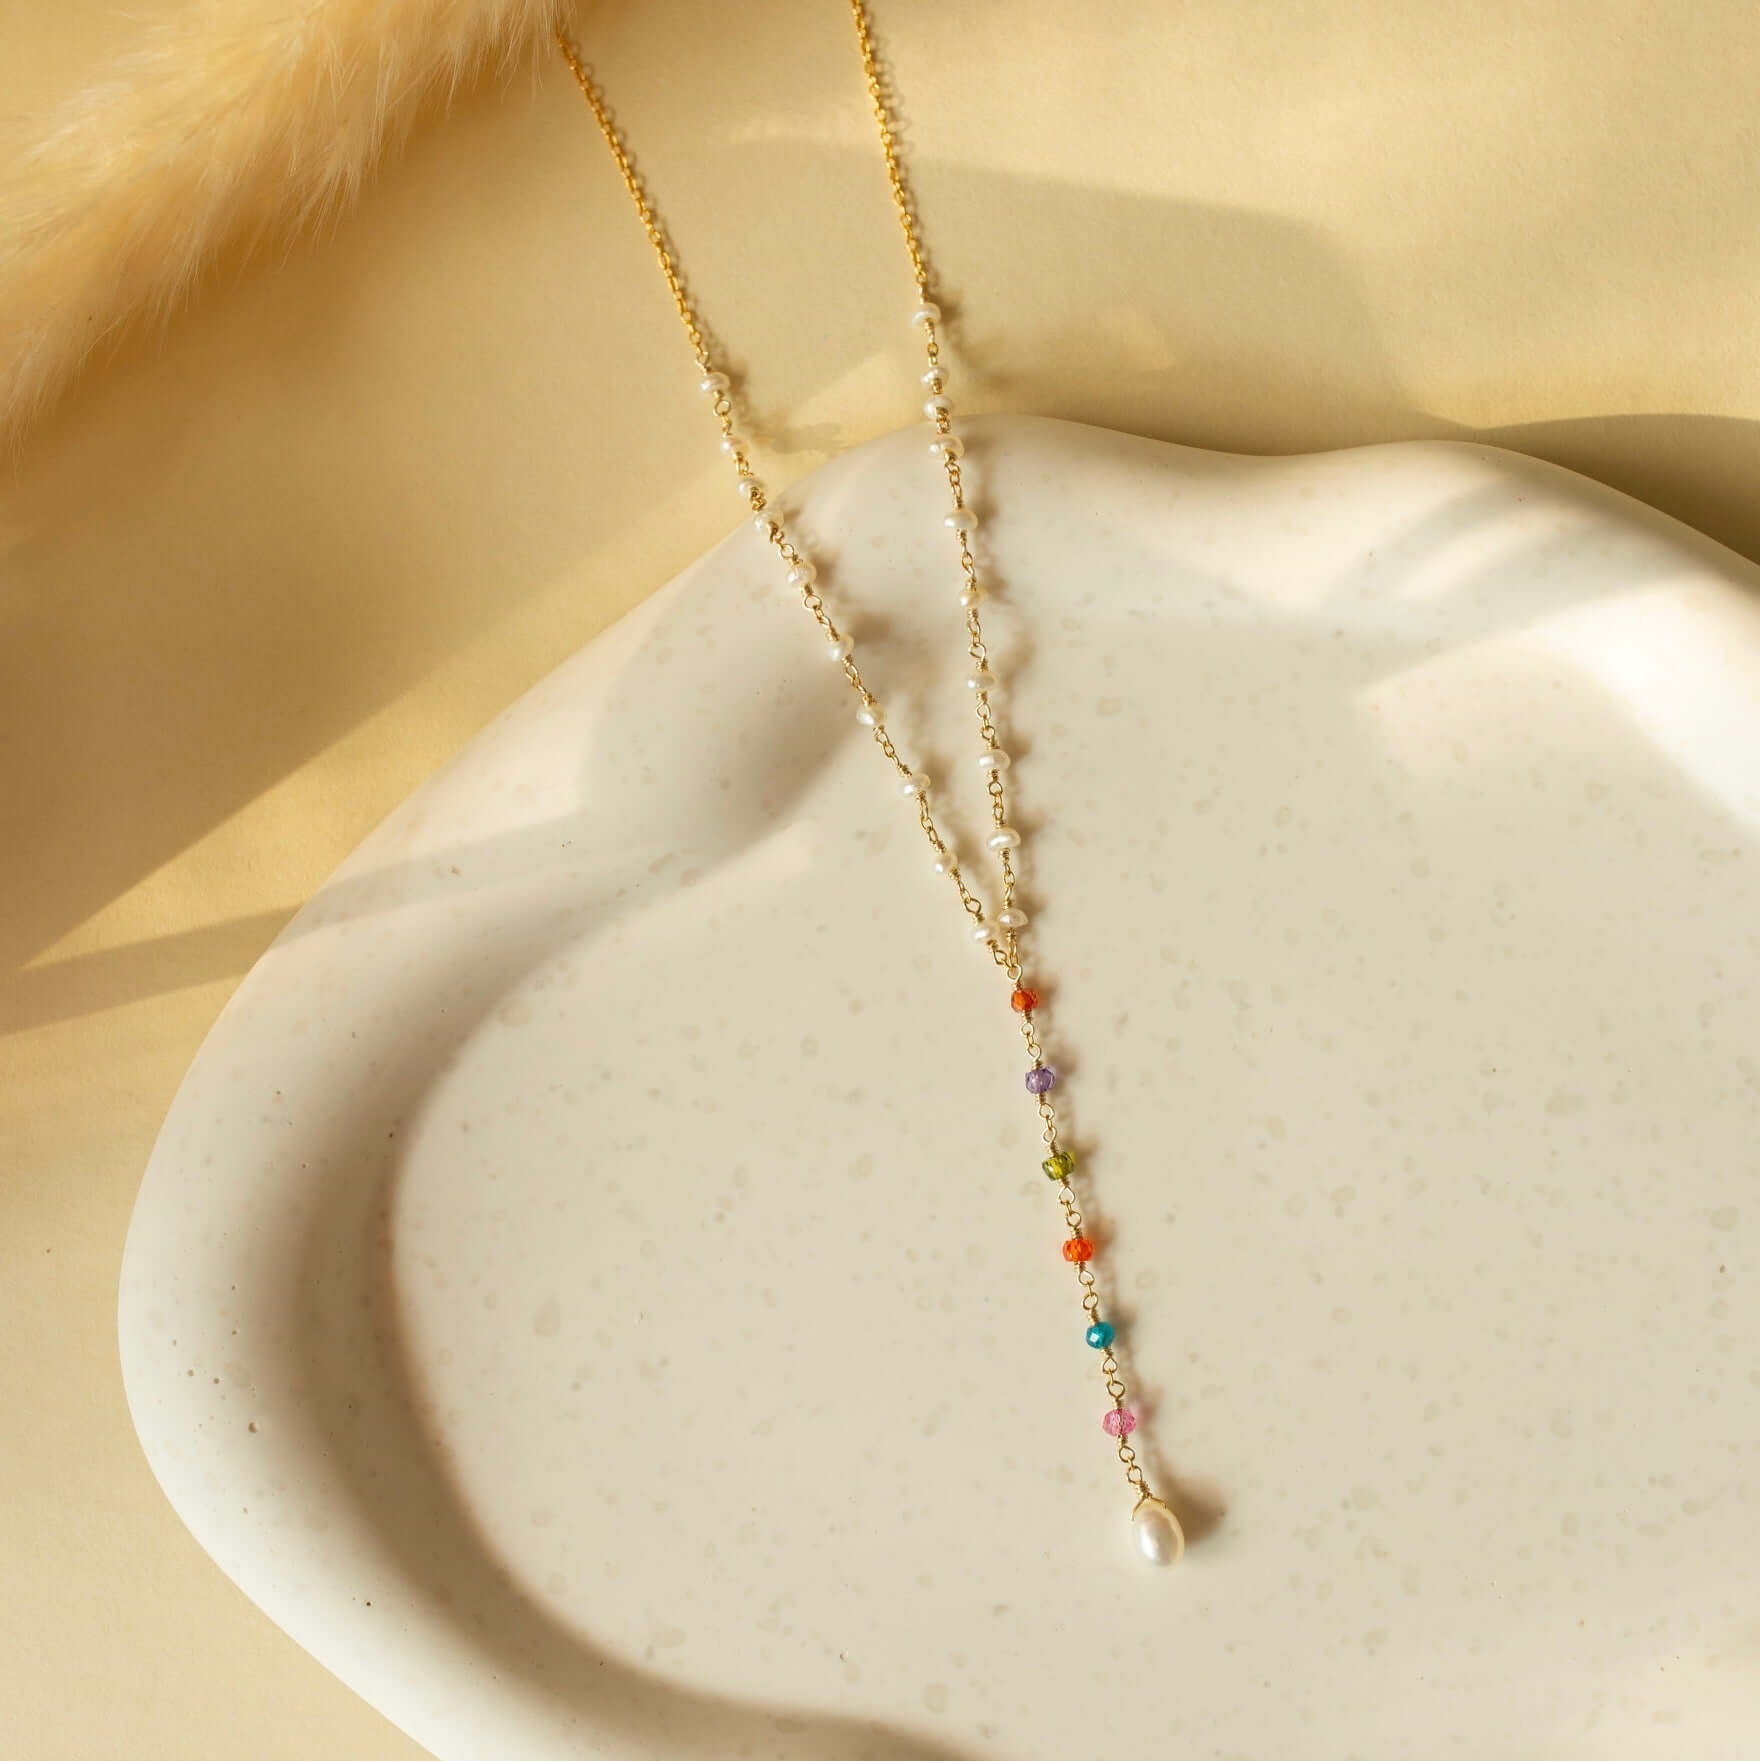 Stylish necklace: classic pearl pendant, colorful charms